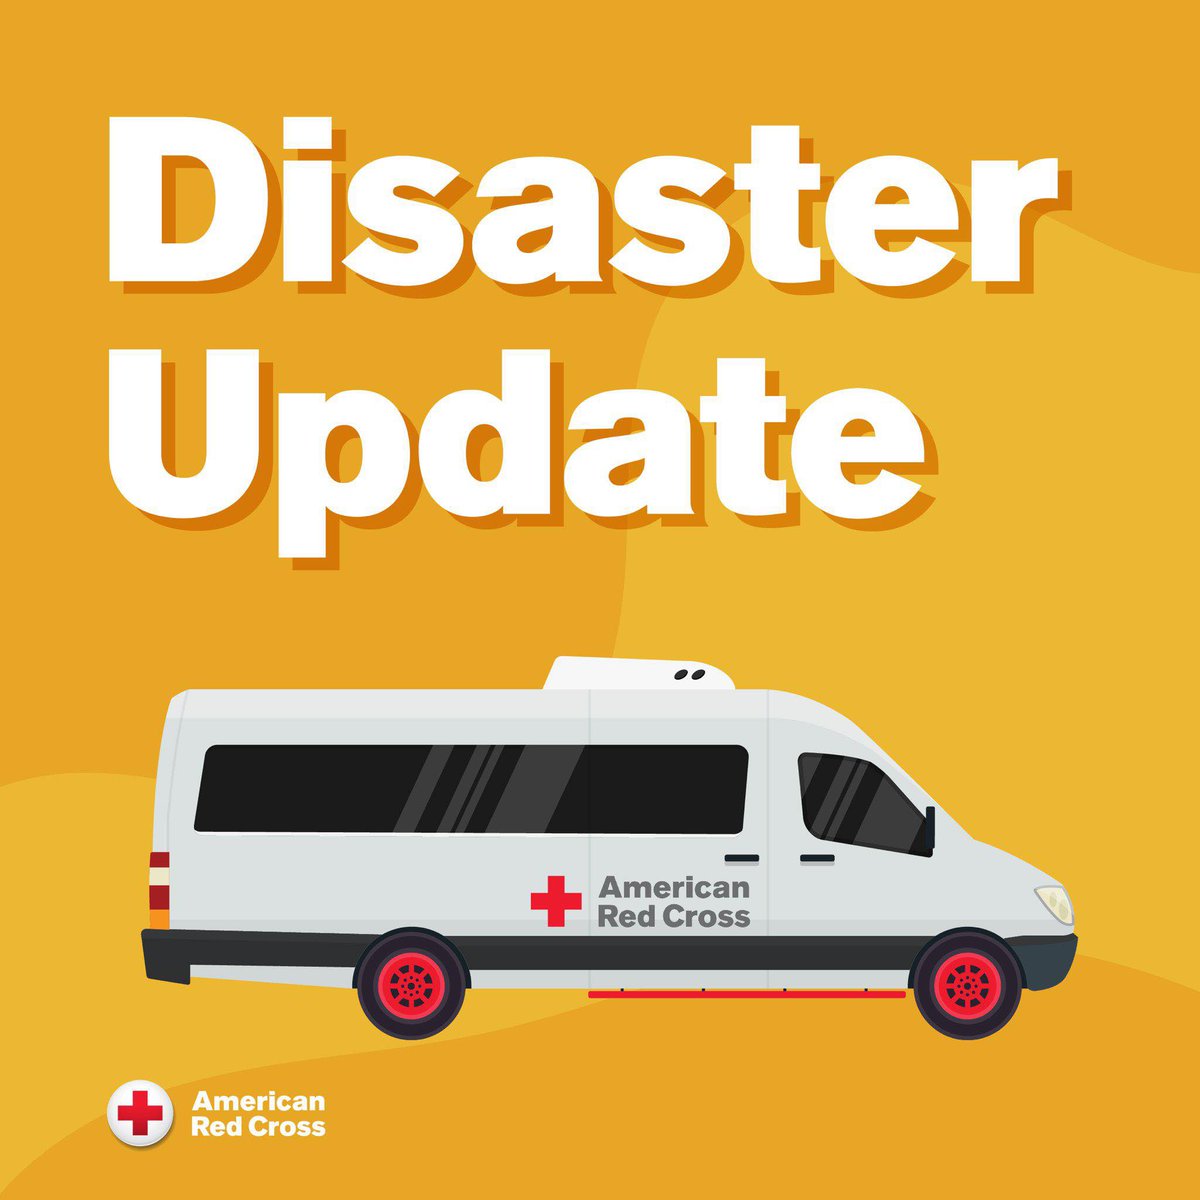 This afternoon @redcrossny provided emergency housing, financial aid, comfort supplies, water and snacks to two families after a fire on Dyre Ave, in The Bronx.